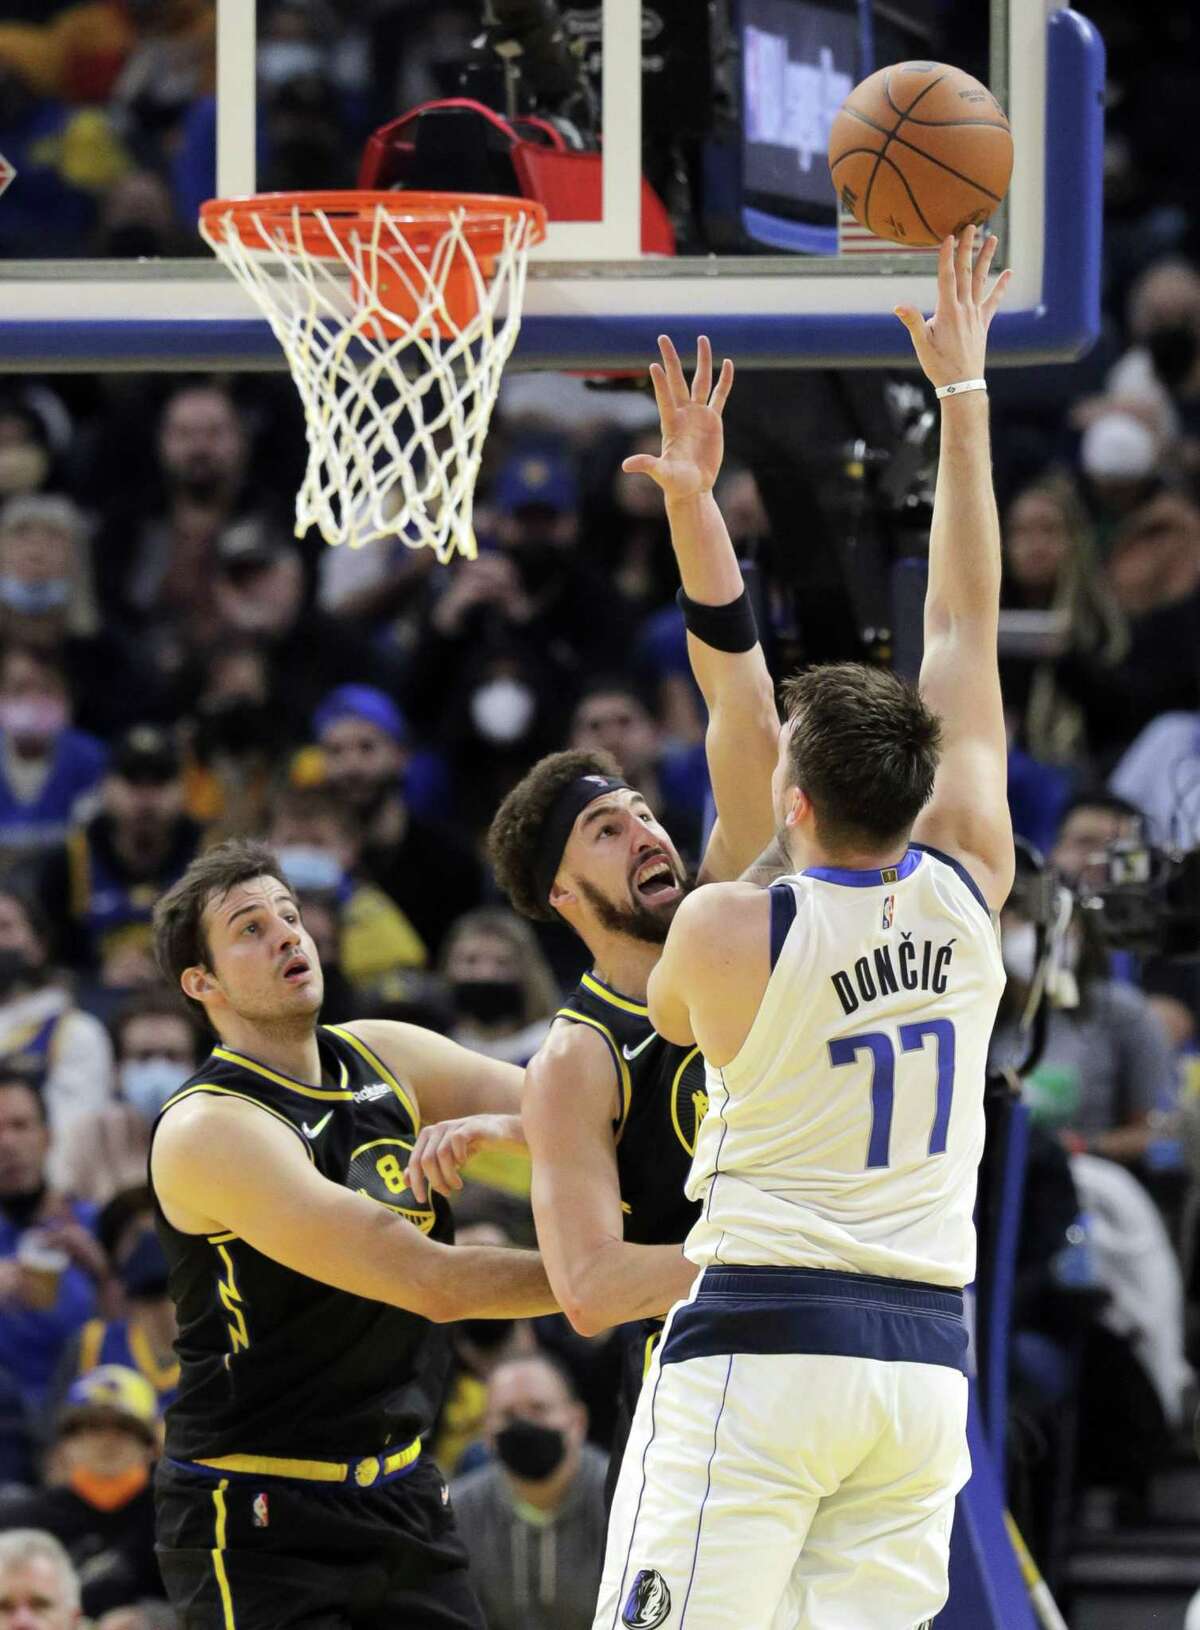 Klay Thomspon (11) defends against a shot by Luka Doncic (77) in the first half as the Golden State Warriors played the Dallas Mavericks at Chase Center in San Francisco, Calif., on Tuesday, January 25, 2022.